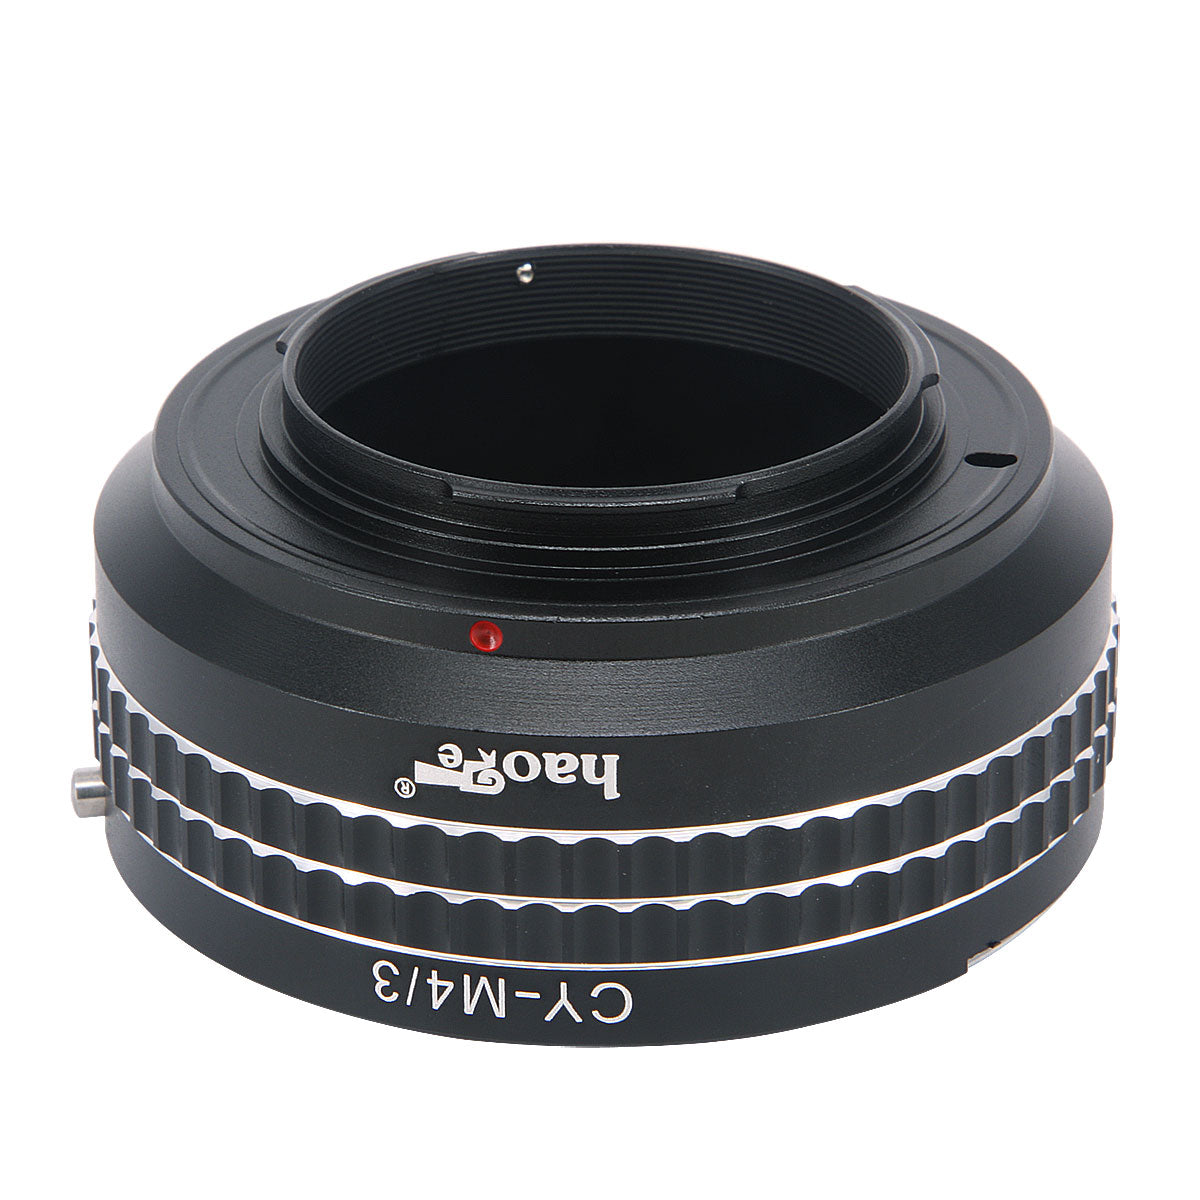 Haoge Manual Lens Mount Adapter for Contax / Yashica C/Y CY mount Lens to Olympus and Panasonic Micro Four Thirds MFT M4/3 M43 Mount Camera